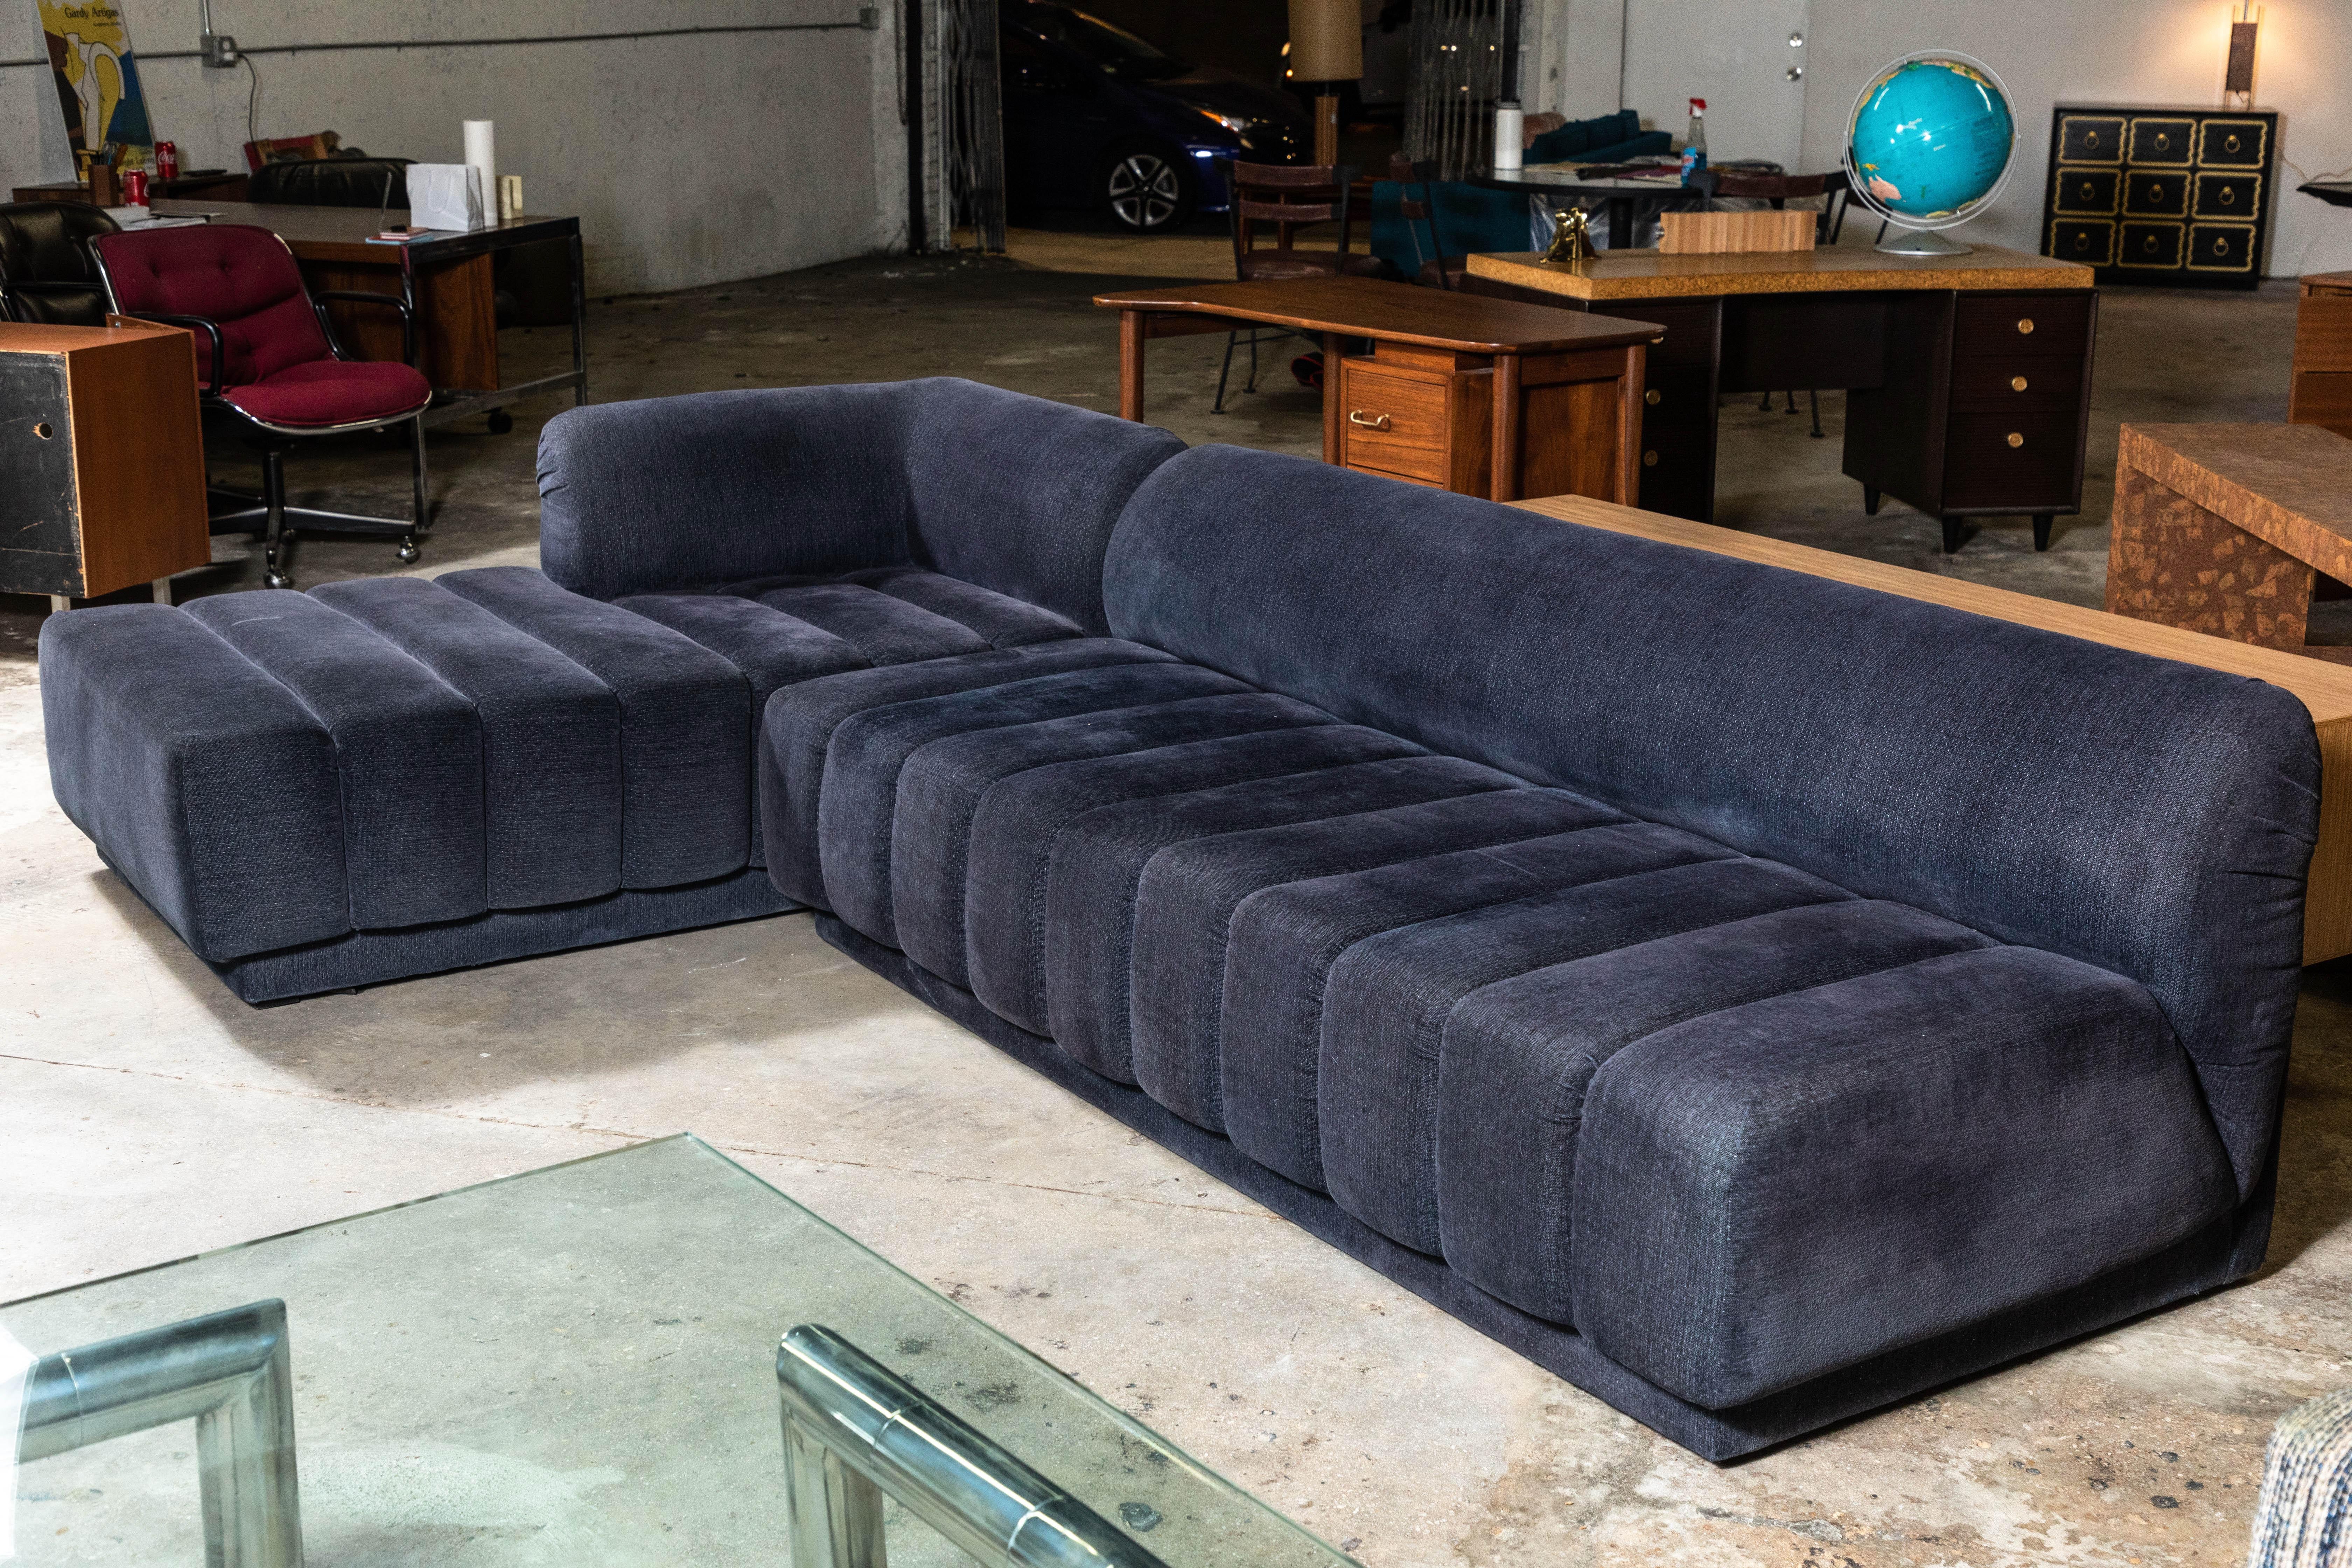 North American Rare and Amazing Designer Sectional Sofa by Directional, Dated 1987 For Sale